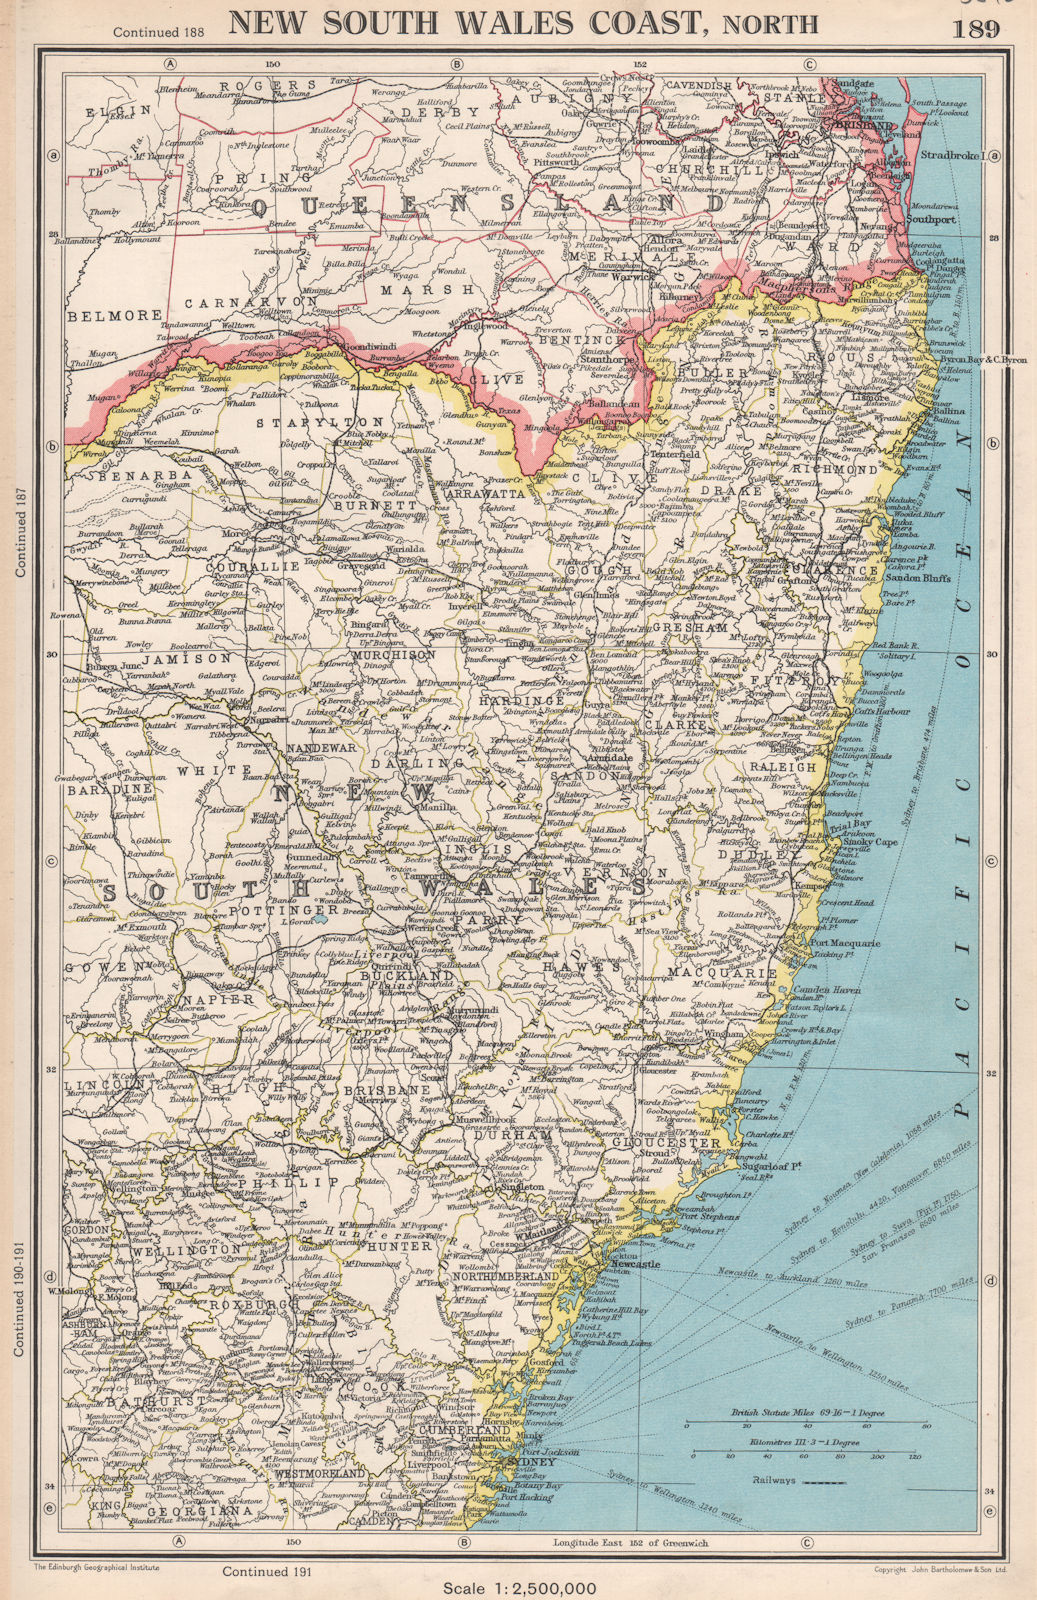 NEW SOUTH WALES COAST, NORTH. showing counties. BARTHOLOMEW 1952 old map